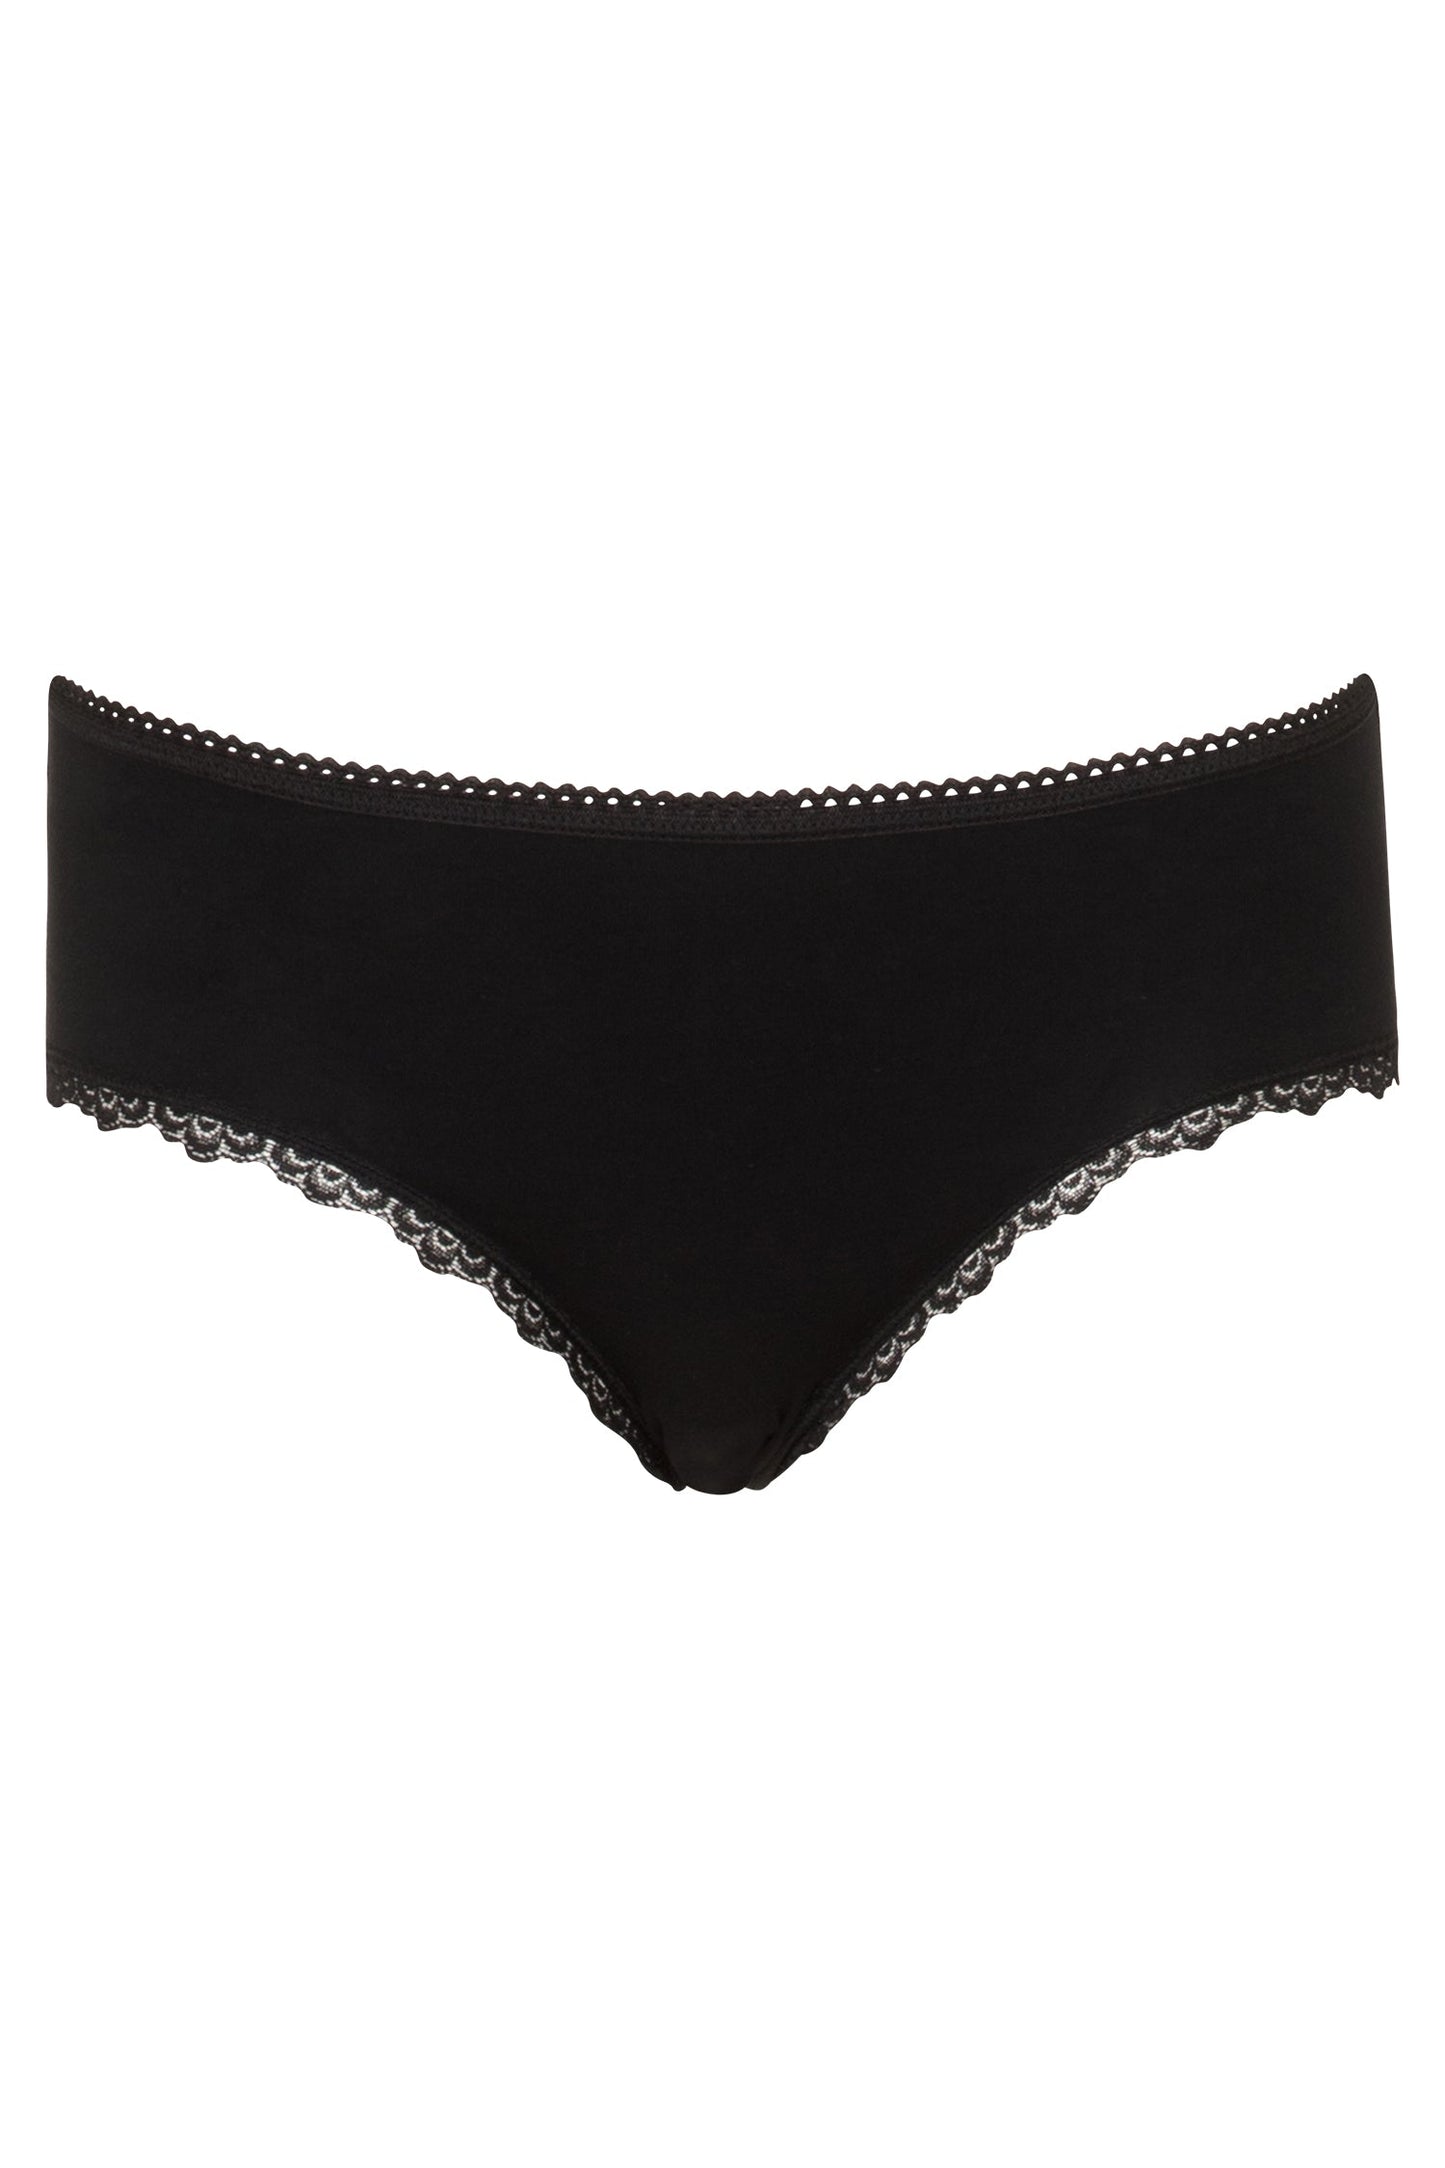 Lotus Lace Hipster - Onyx Black